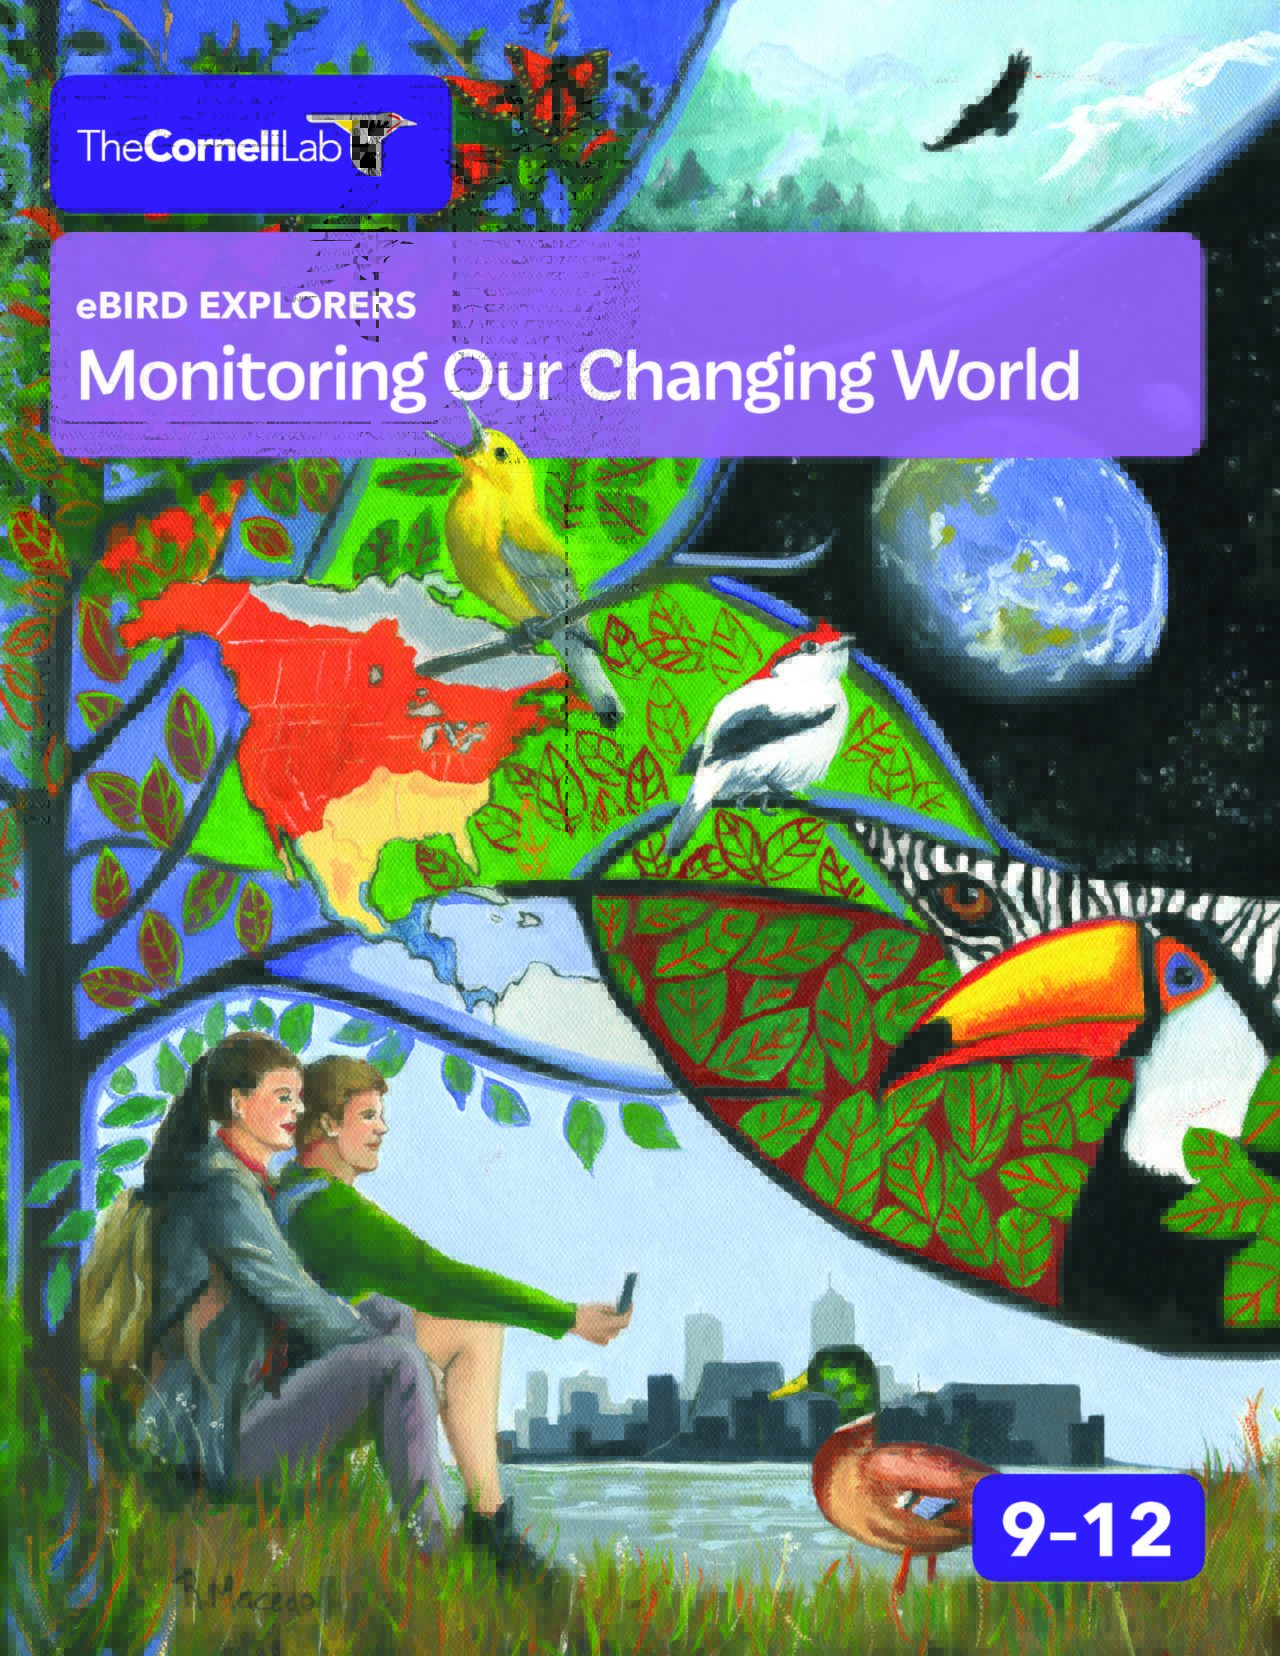 ebird 9-12 cover titled "eBird Explorers - Monitoring Our Changing World" It show 2 people sitting under a tree learning about the birds they are spotting.